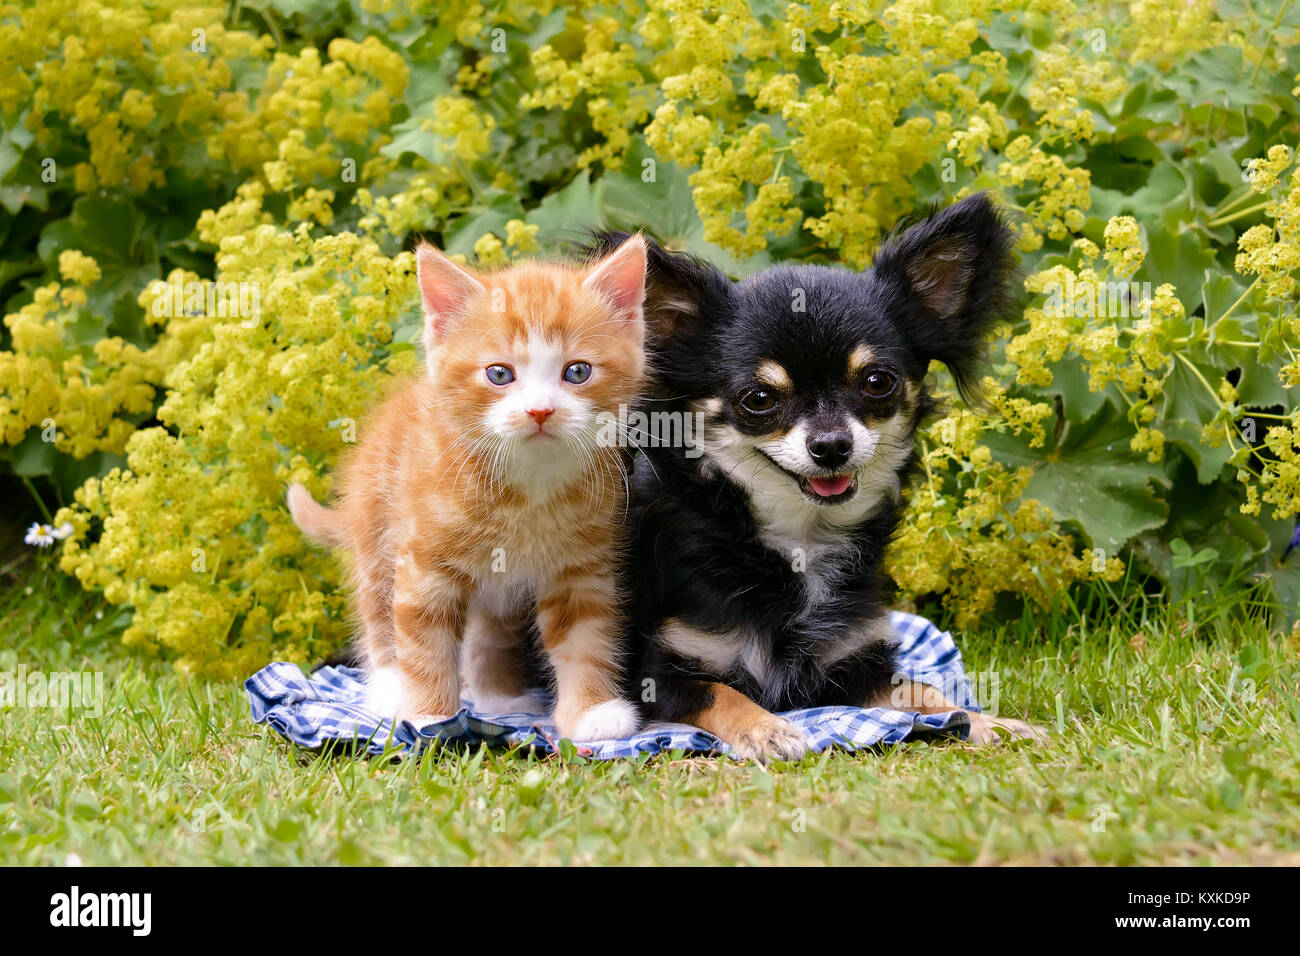 A cute little red tabby cat kitten and a Chihuahua dog side by side in a flowery garden, a close friendship Stock Photo